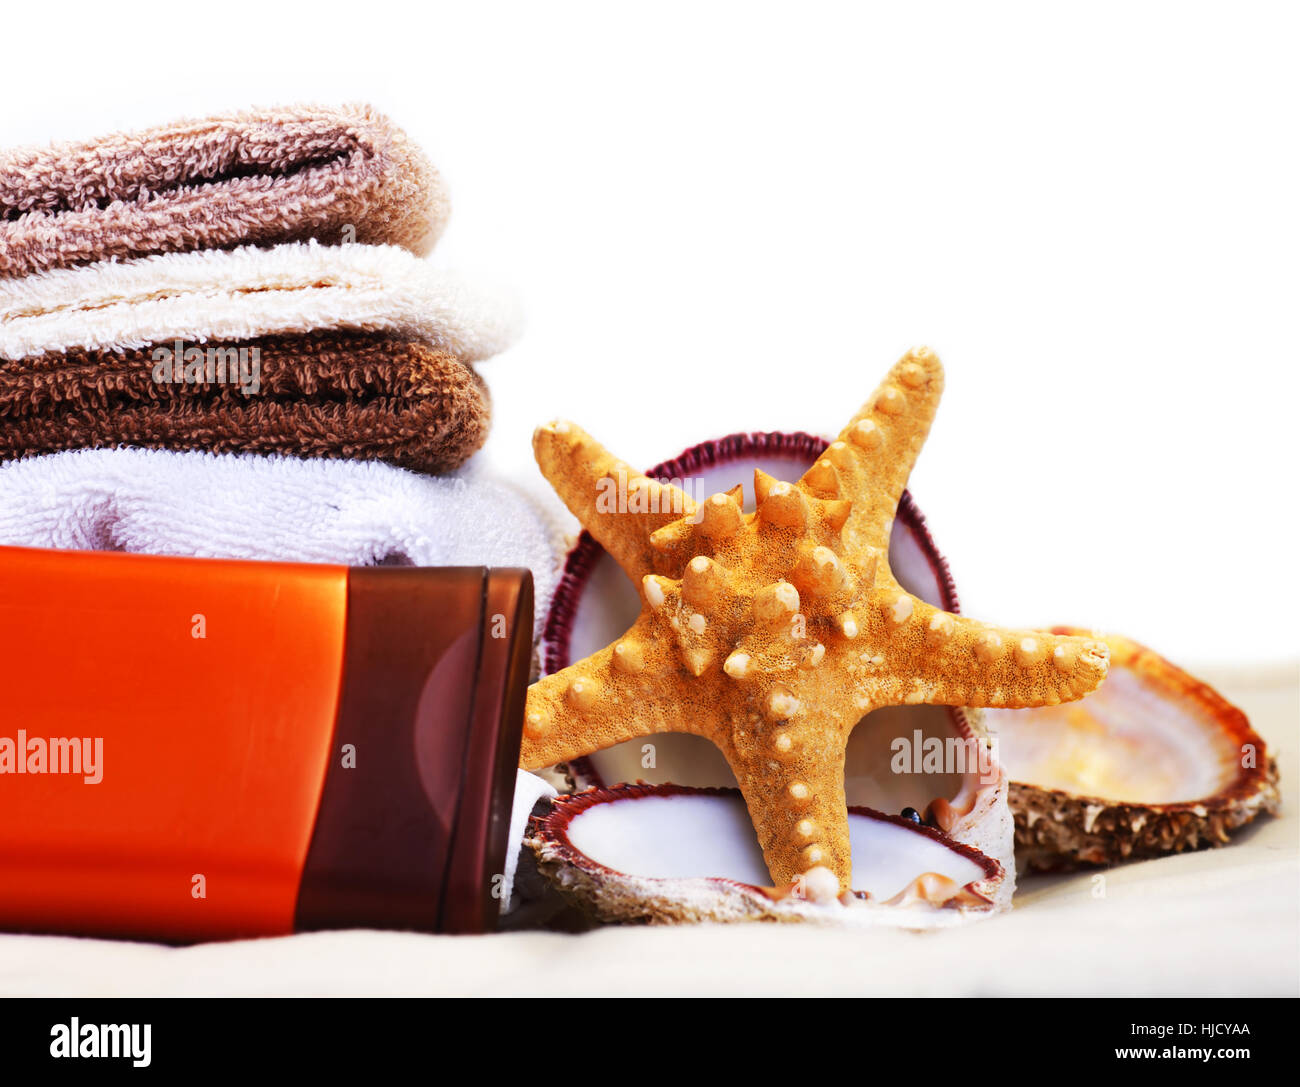 isolated, model, design, project, concept, plan, draft, holiday, vacation, Stock Photo